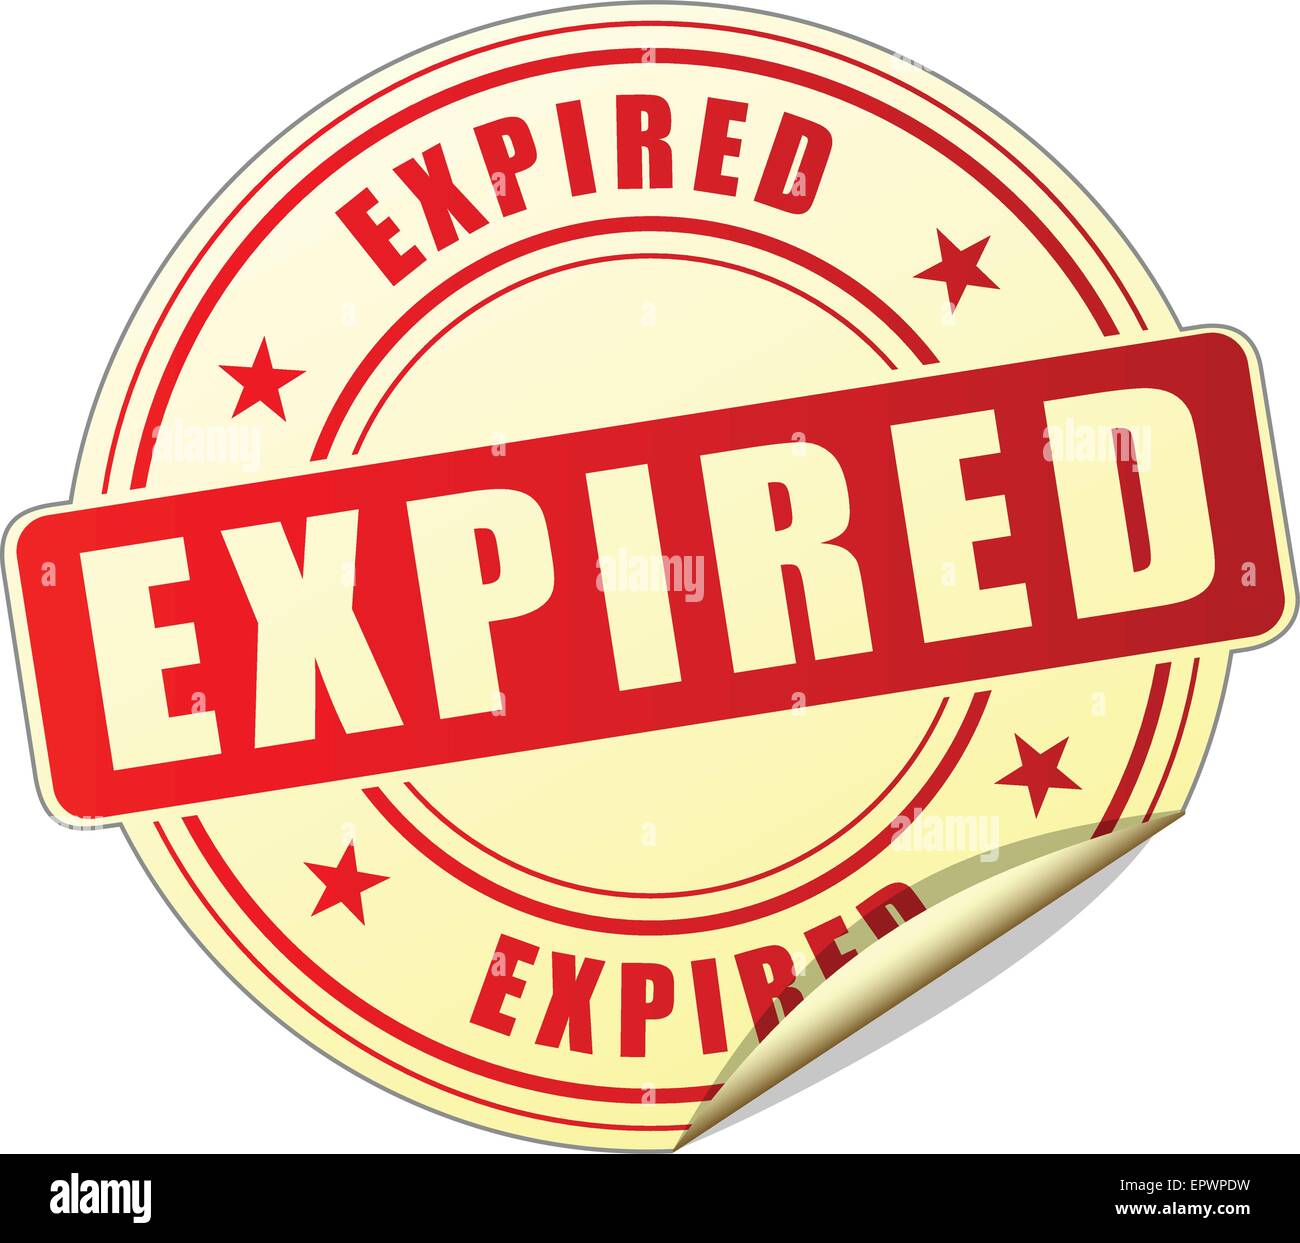 illustration of expired label design red icon Stock Vector